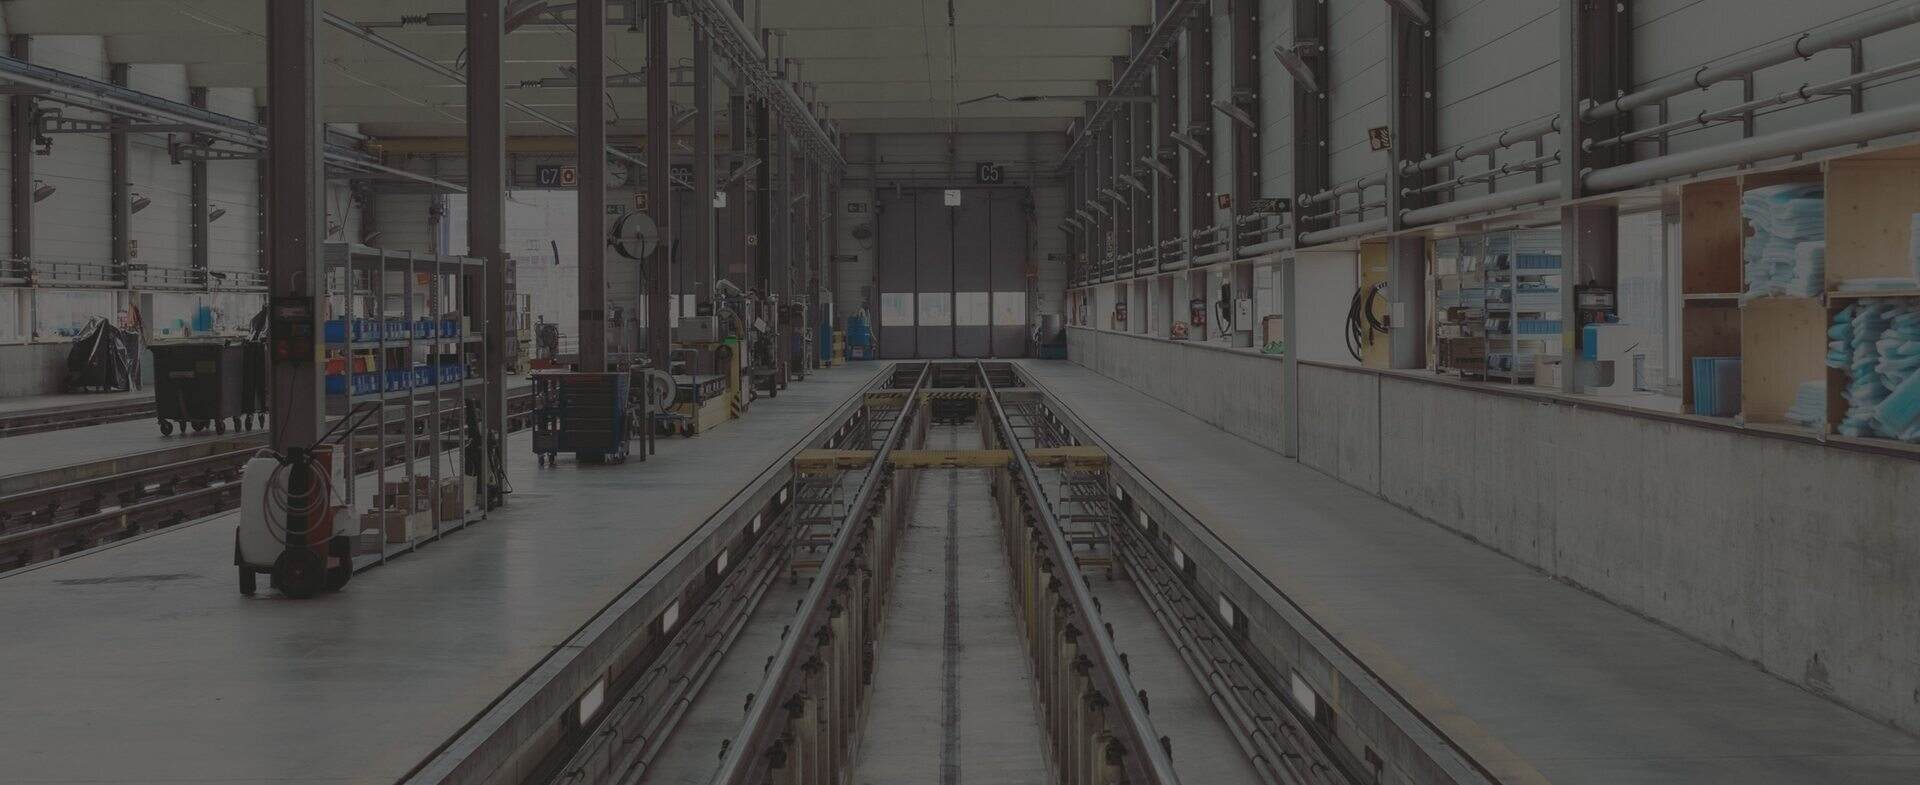 An image of a conveyor belt in a factory.